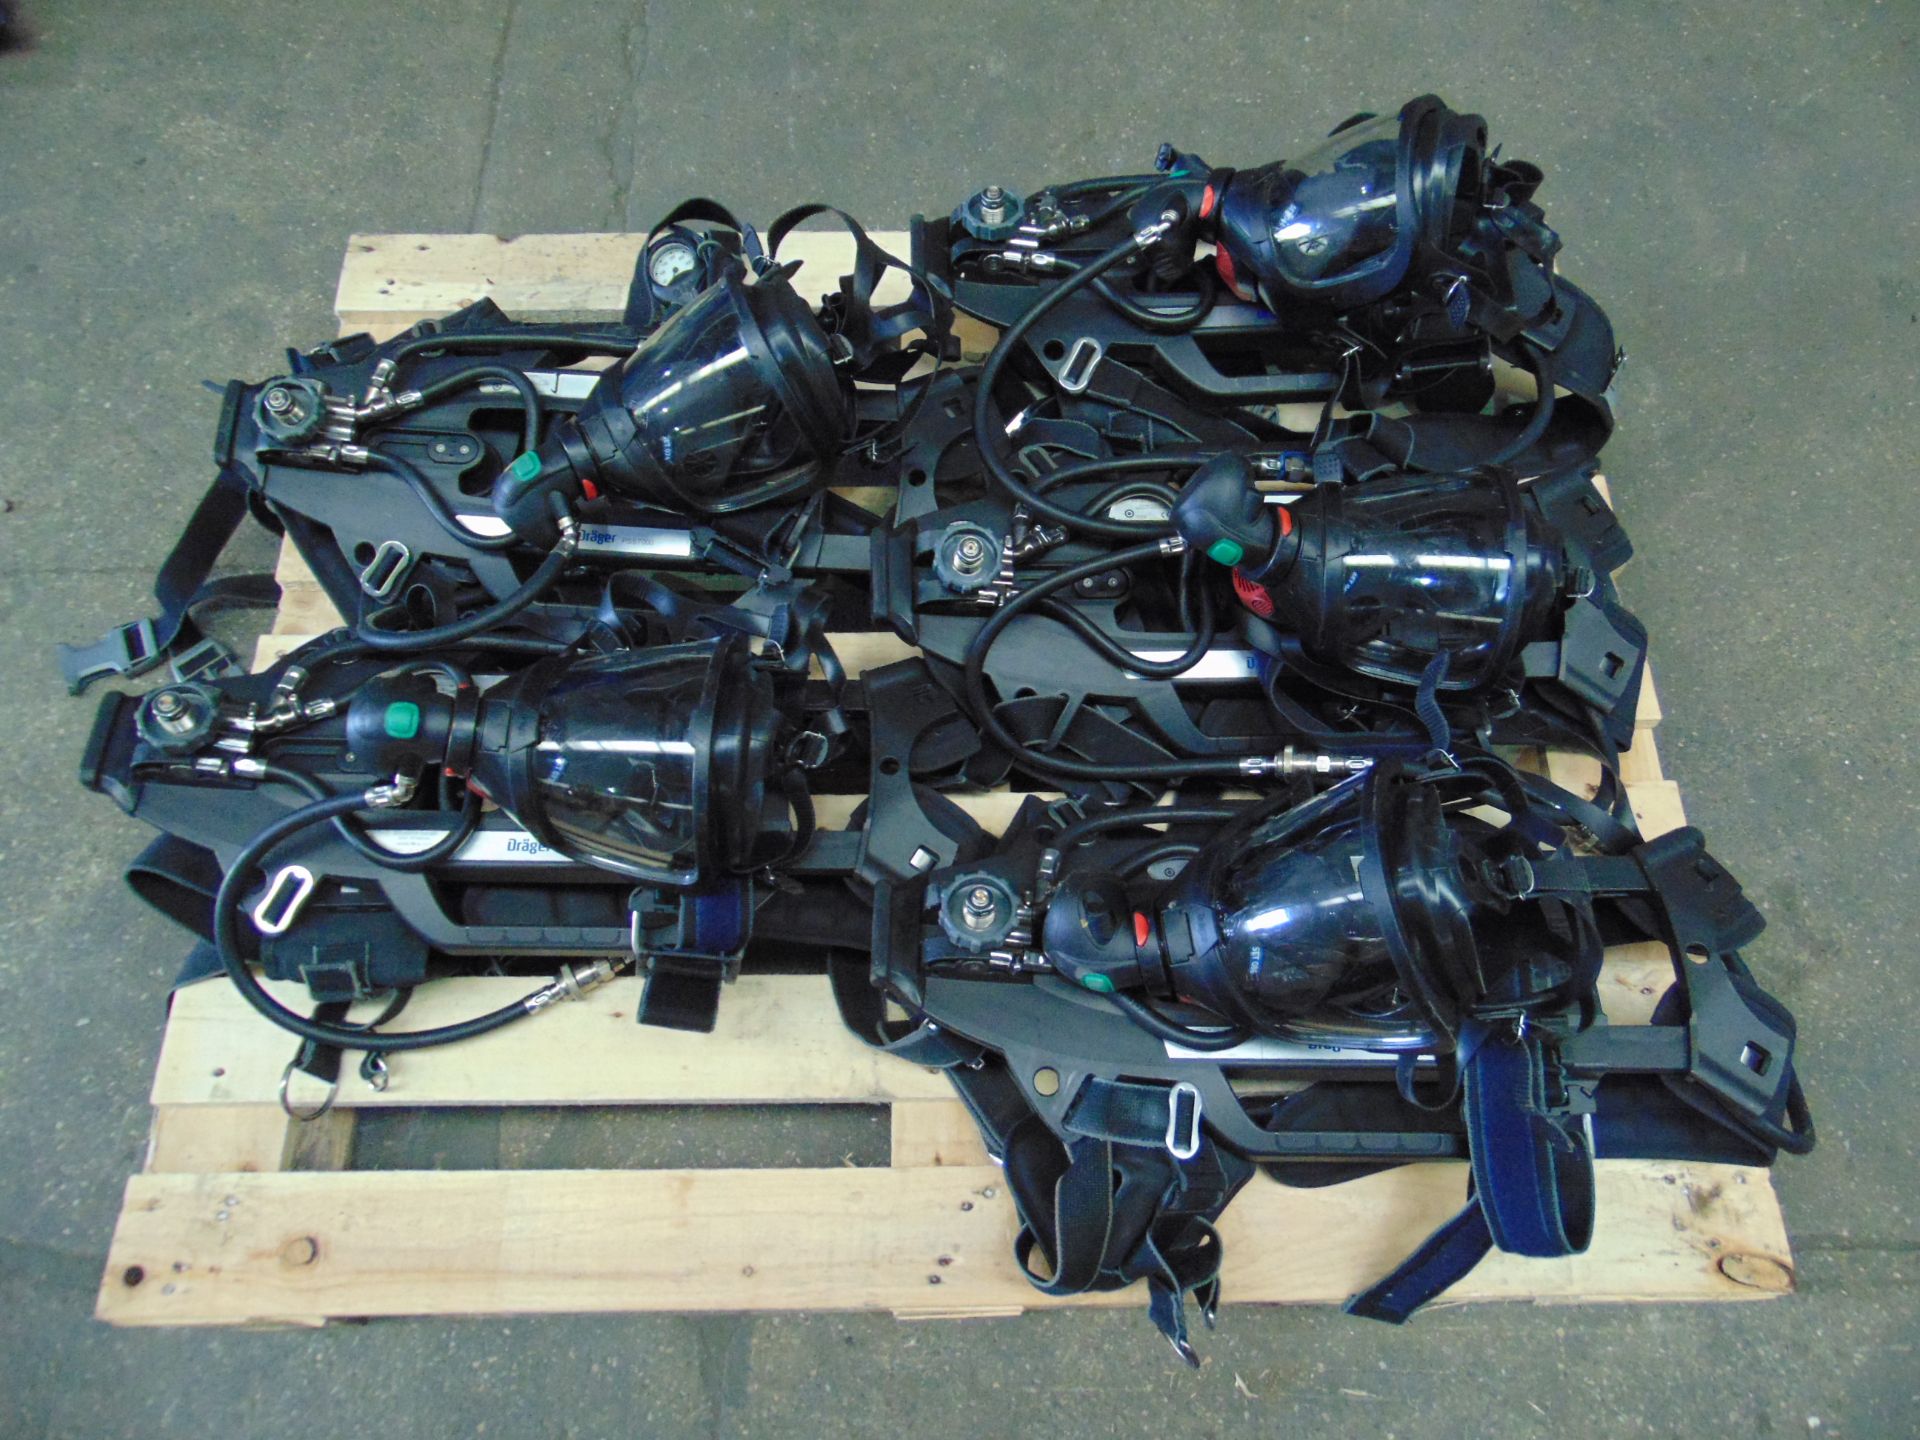 5 x Drager PSS 7000 Self Contained Breathing Apparatus w/ 10 x Drager 300 Bar Air Cylinders - Image 9 of 21